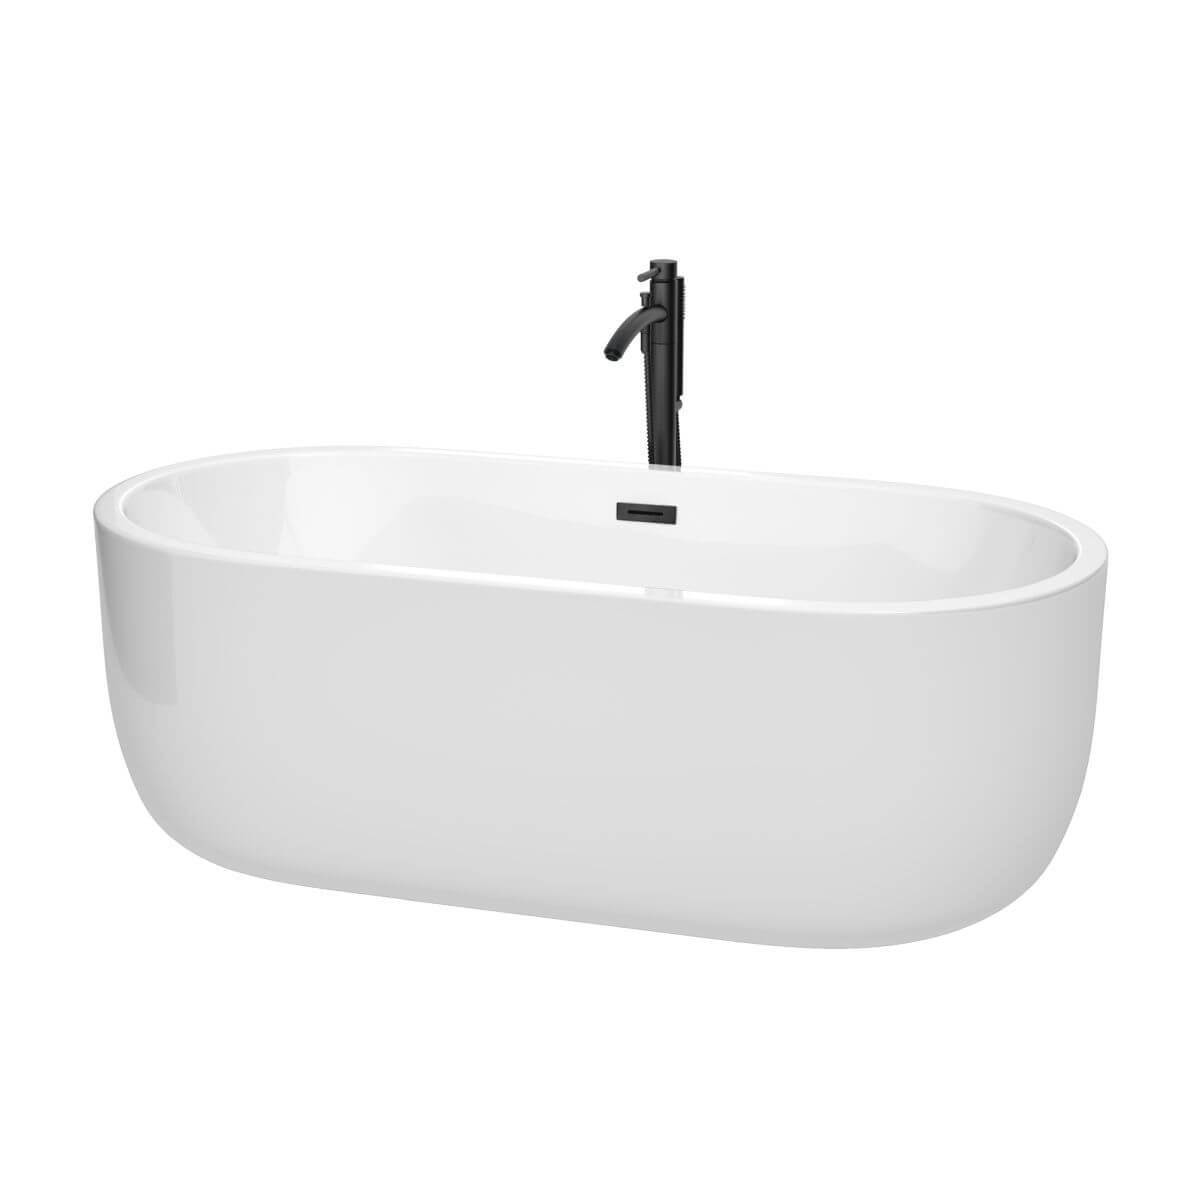 Wyndham Collection Juliette 67 inch Freestanding Bathtub in White with Floor Mounted Faucet, Drain and Overflow Trim in Matte Black - WCOBT101367MBATPBK